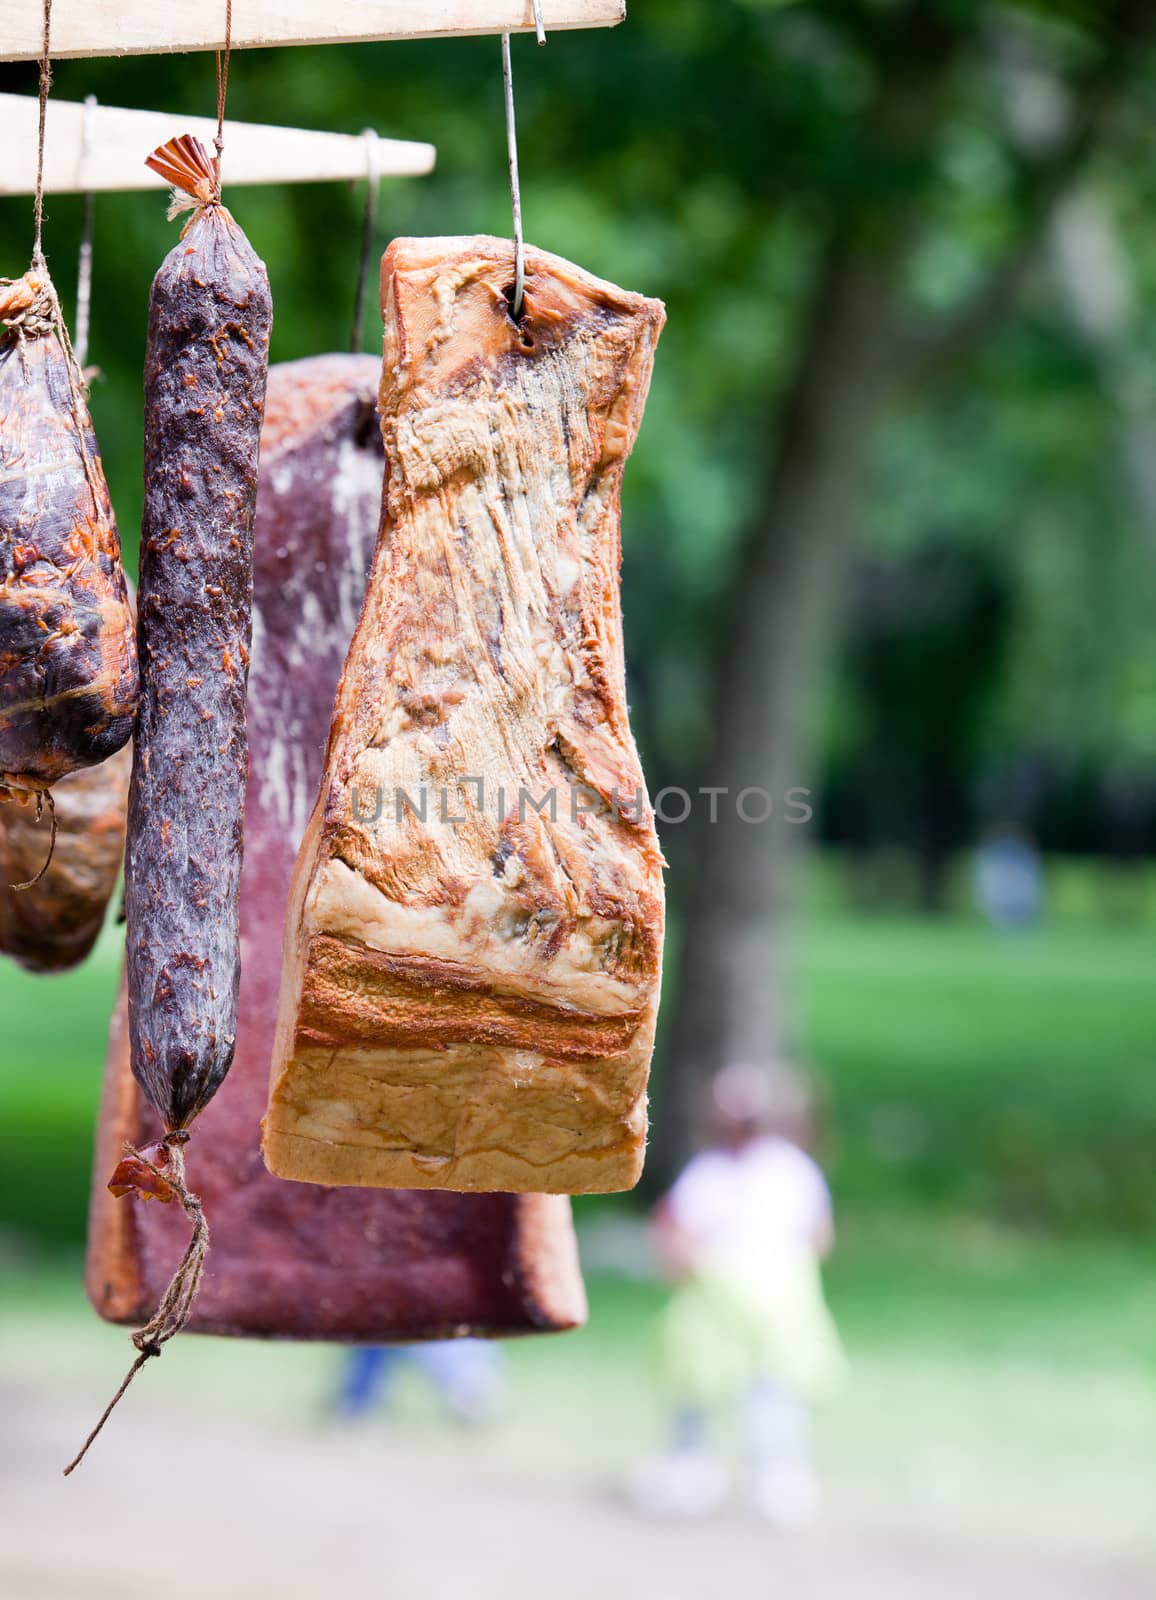 Meat by wellphoto